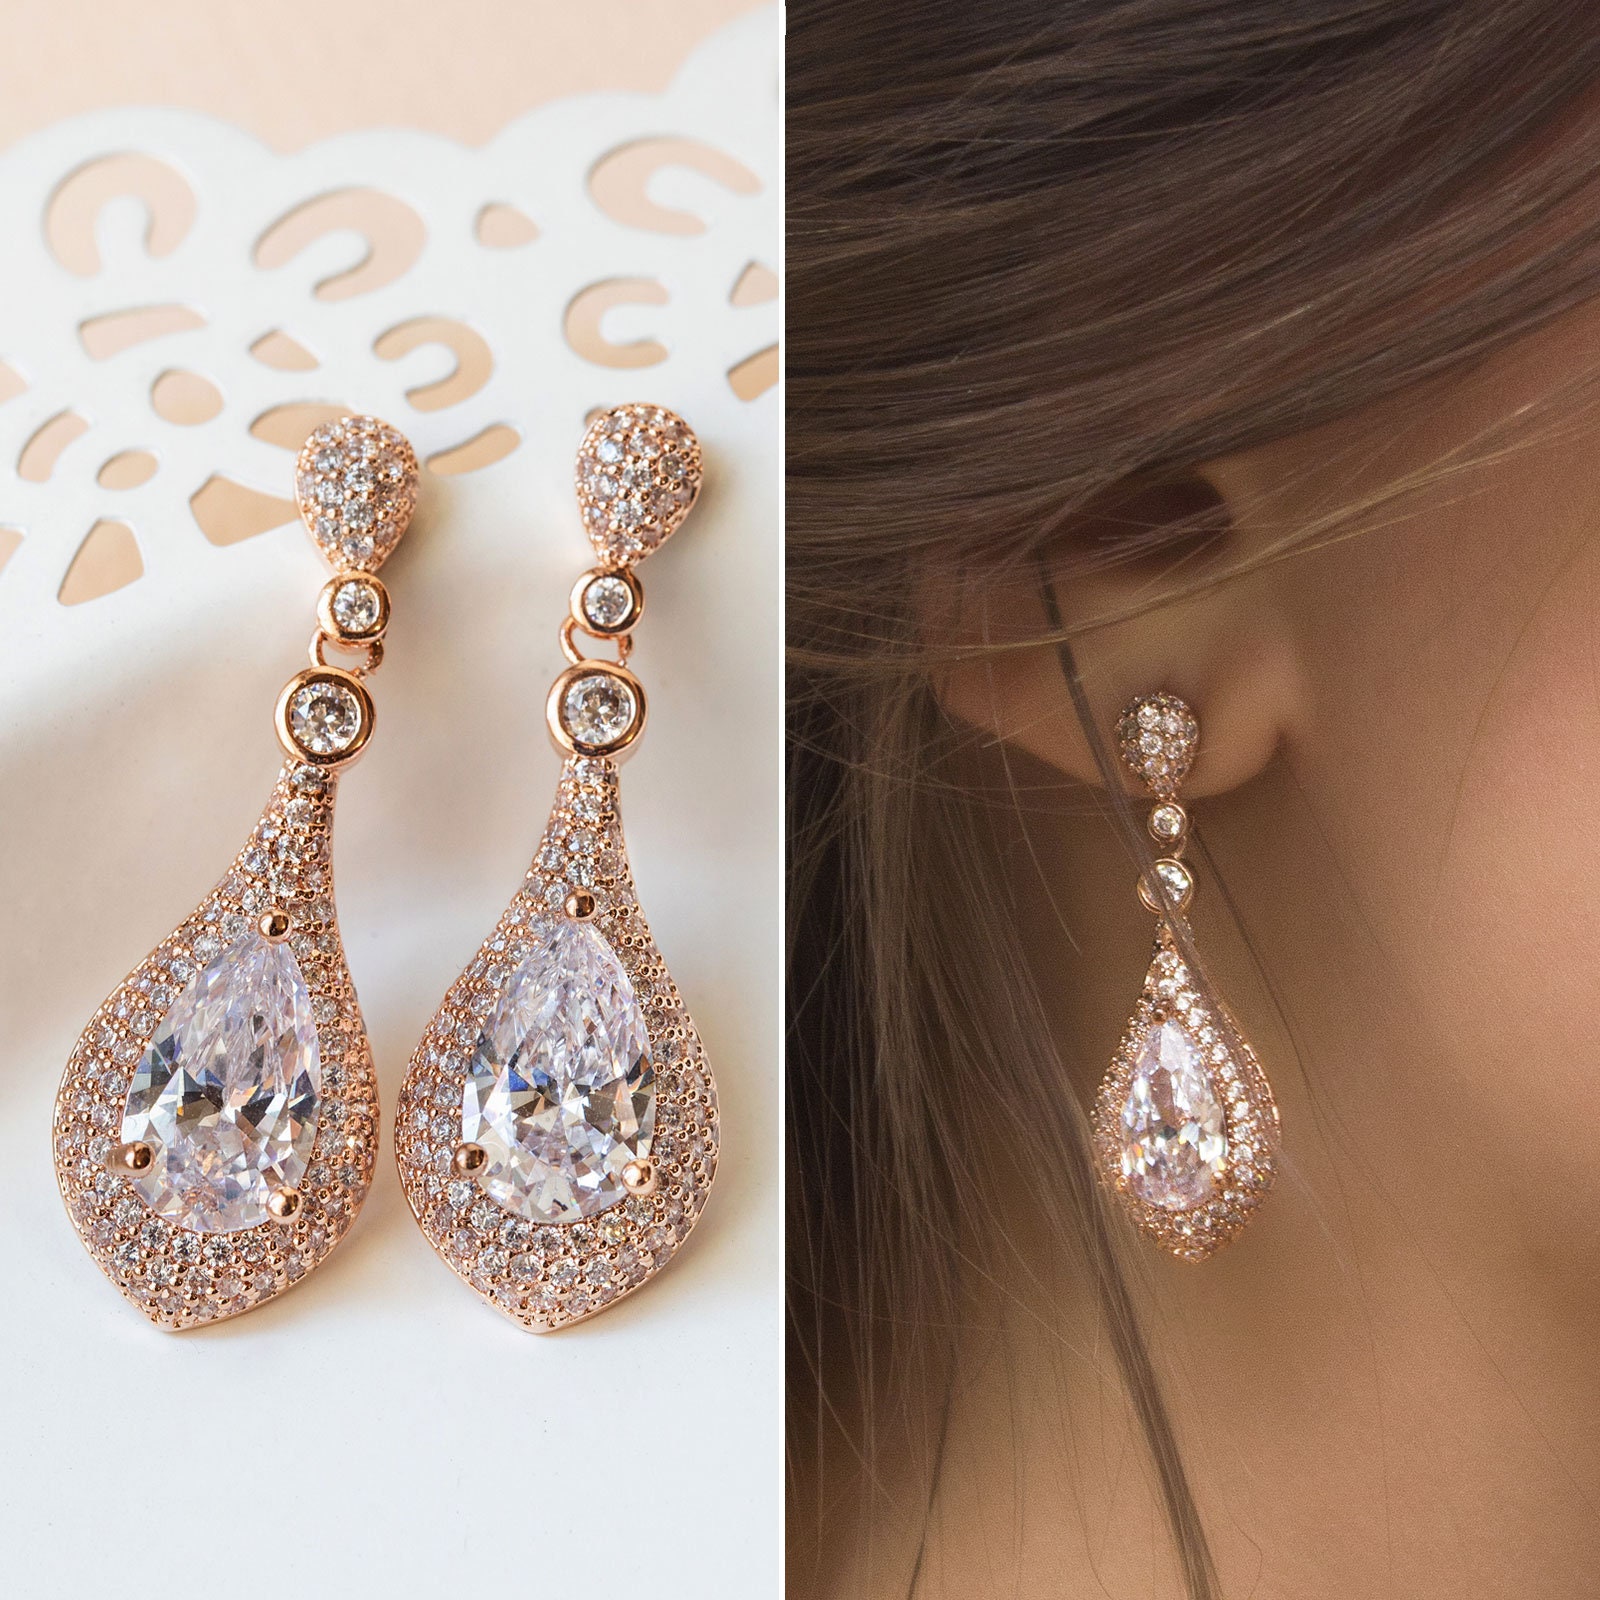 Crystal and rose gold Earrings gift Bride earrings Rose Gold Zirconia Wedding Earrings Bridal Crystal Earrings Statement earrings